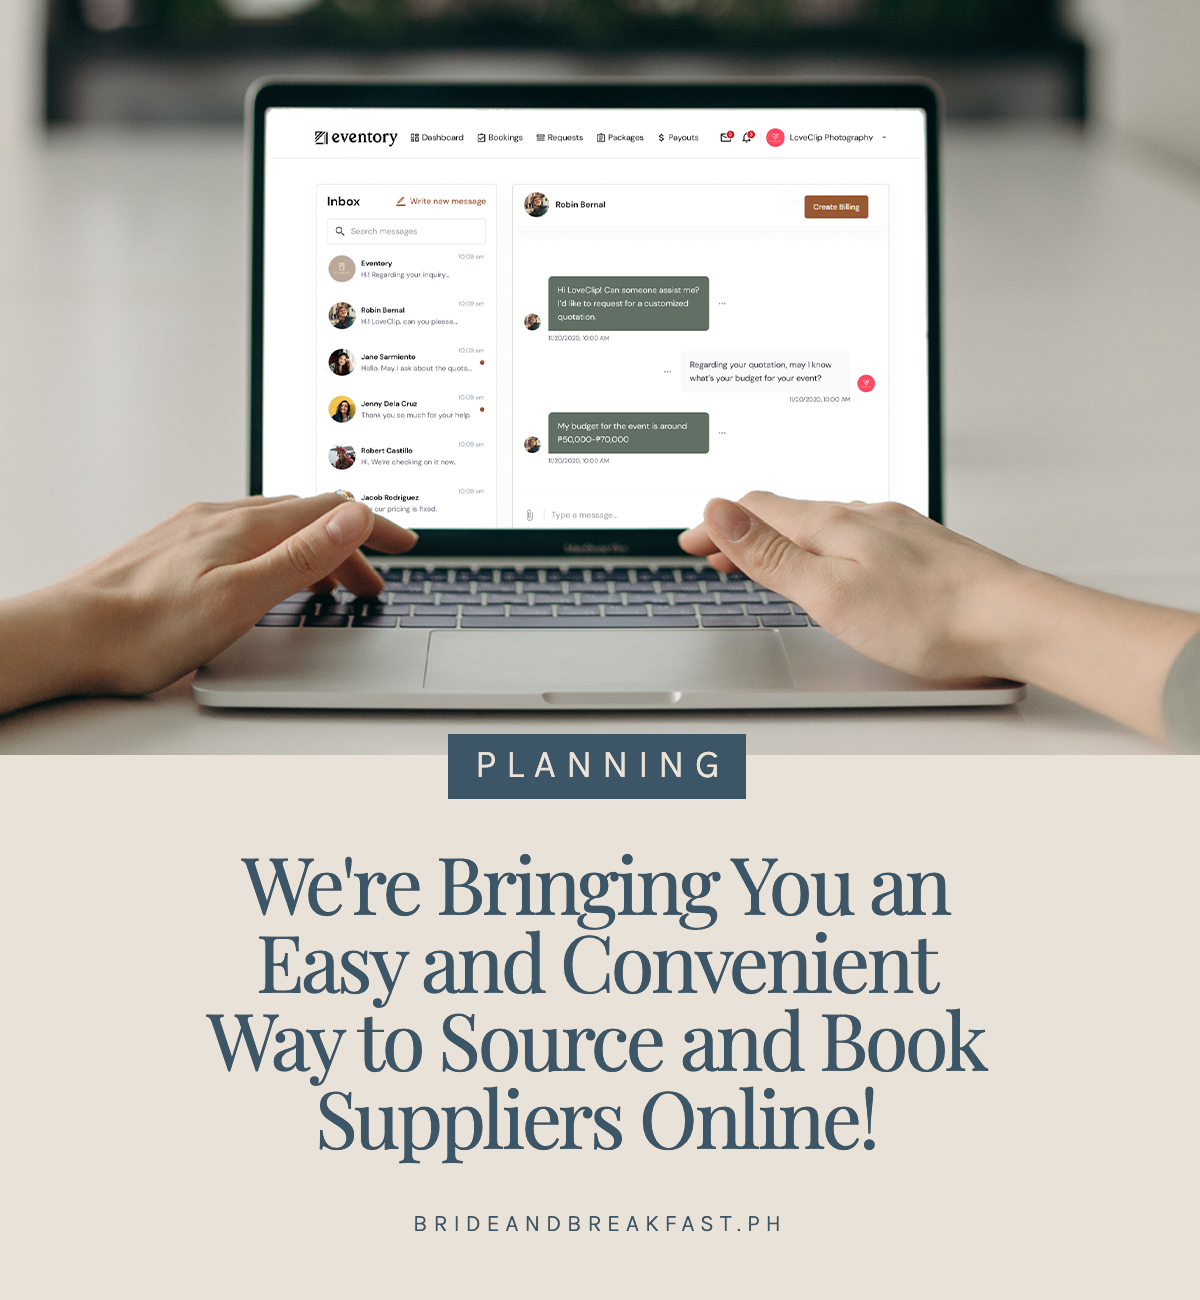 We're Bringing You an Easy and Convenient Way to Source and Book Suppliers Online 